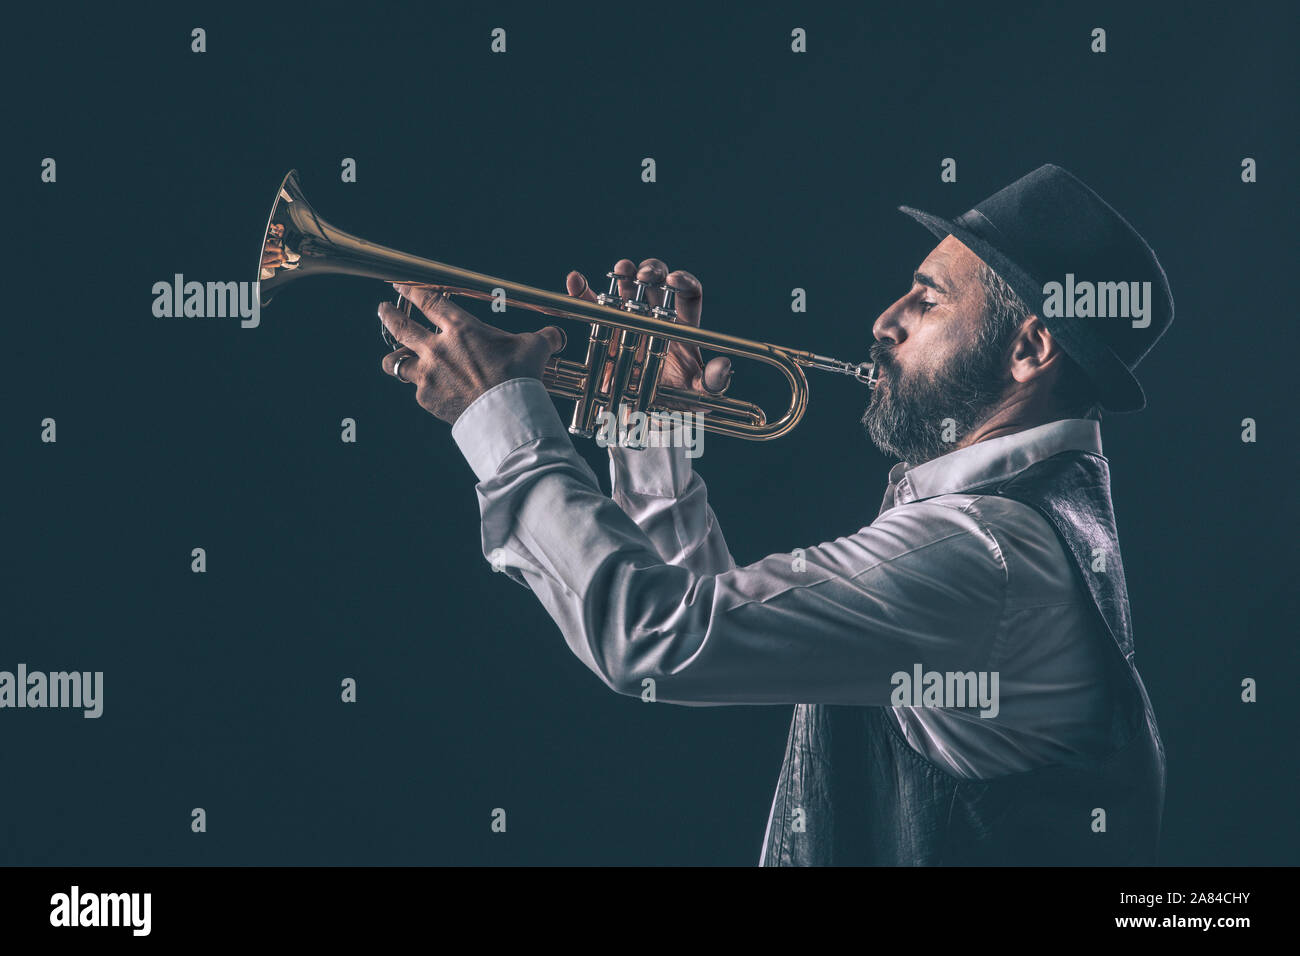 profile view of a jazz trumpet player with beard and hat.black background. Stock Photo